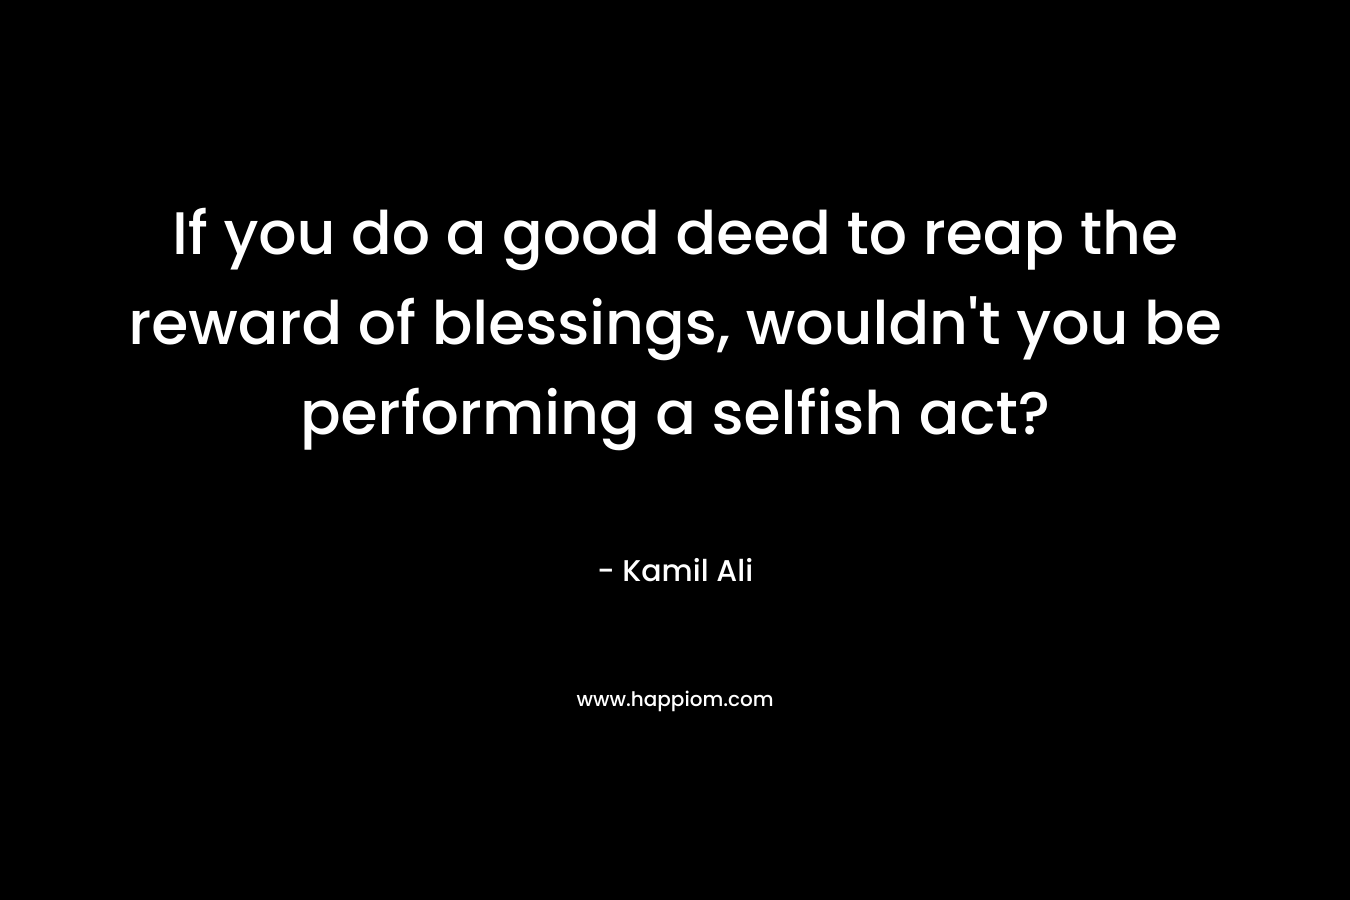 If you do a good deed to reap the reward of blessings, wouldn’t you be performing a selfish act? – Kamil Ali